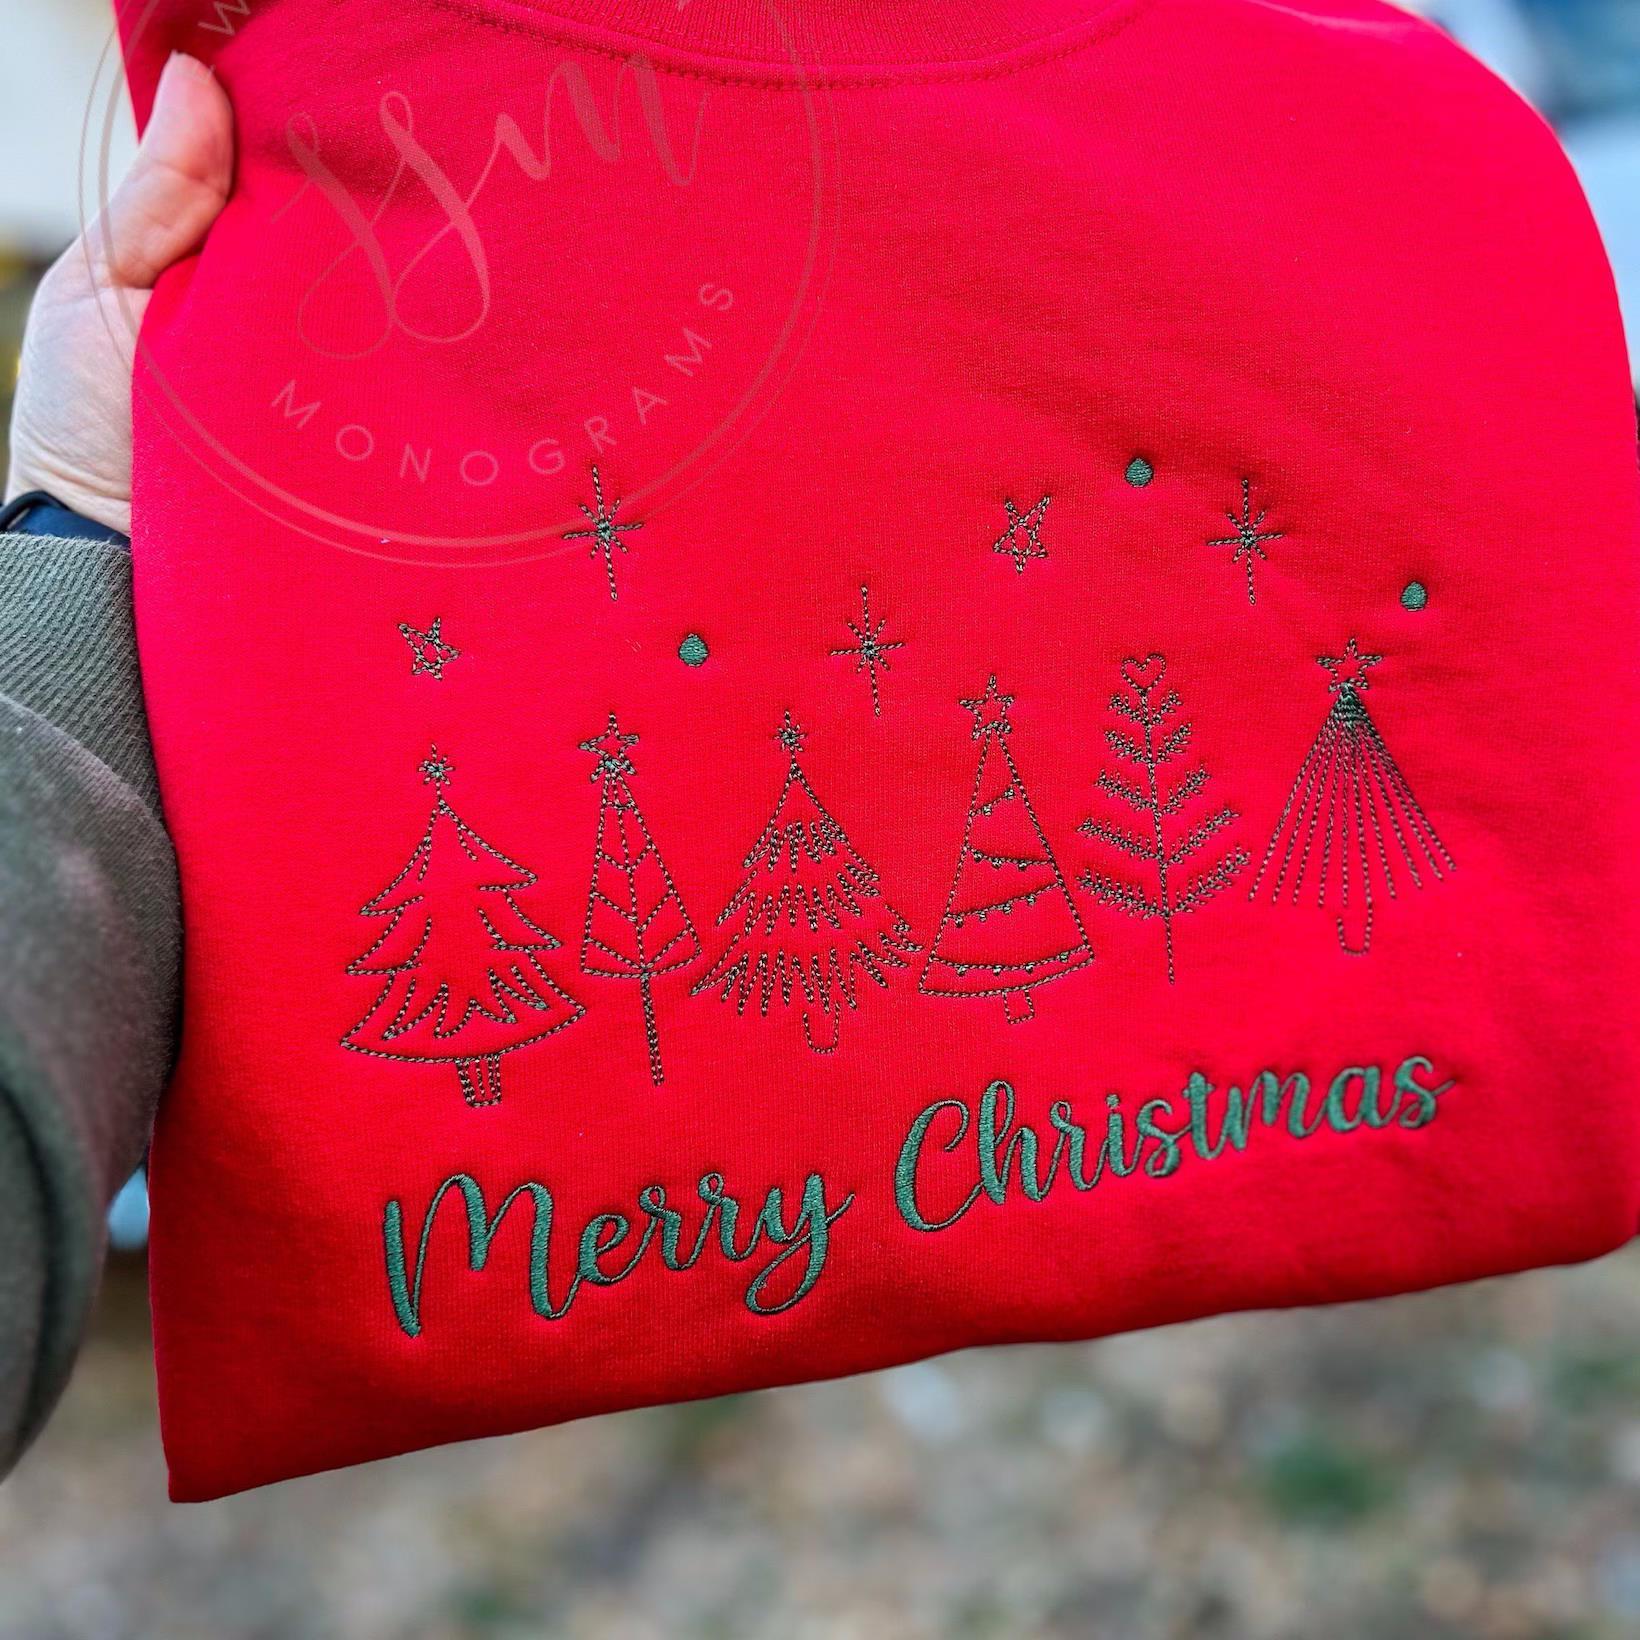 Stitching Holiday Crafting Unique Christmas Tree Embroidery on Hoody